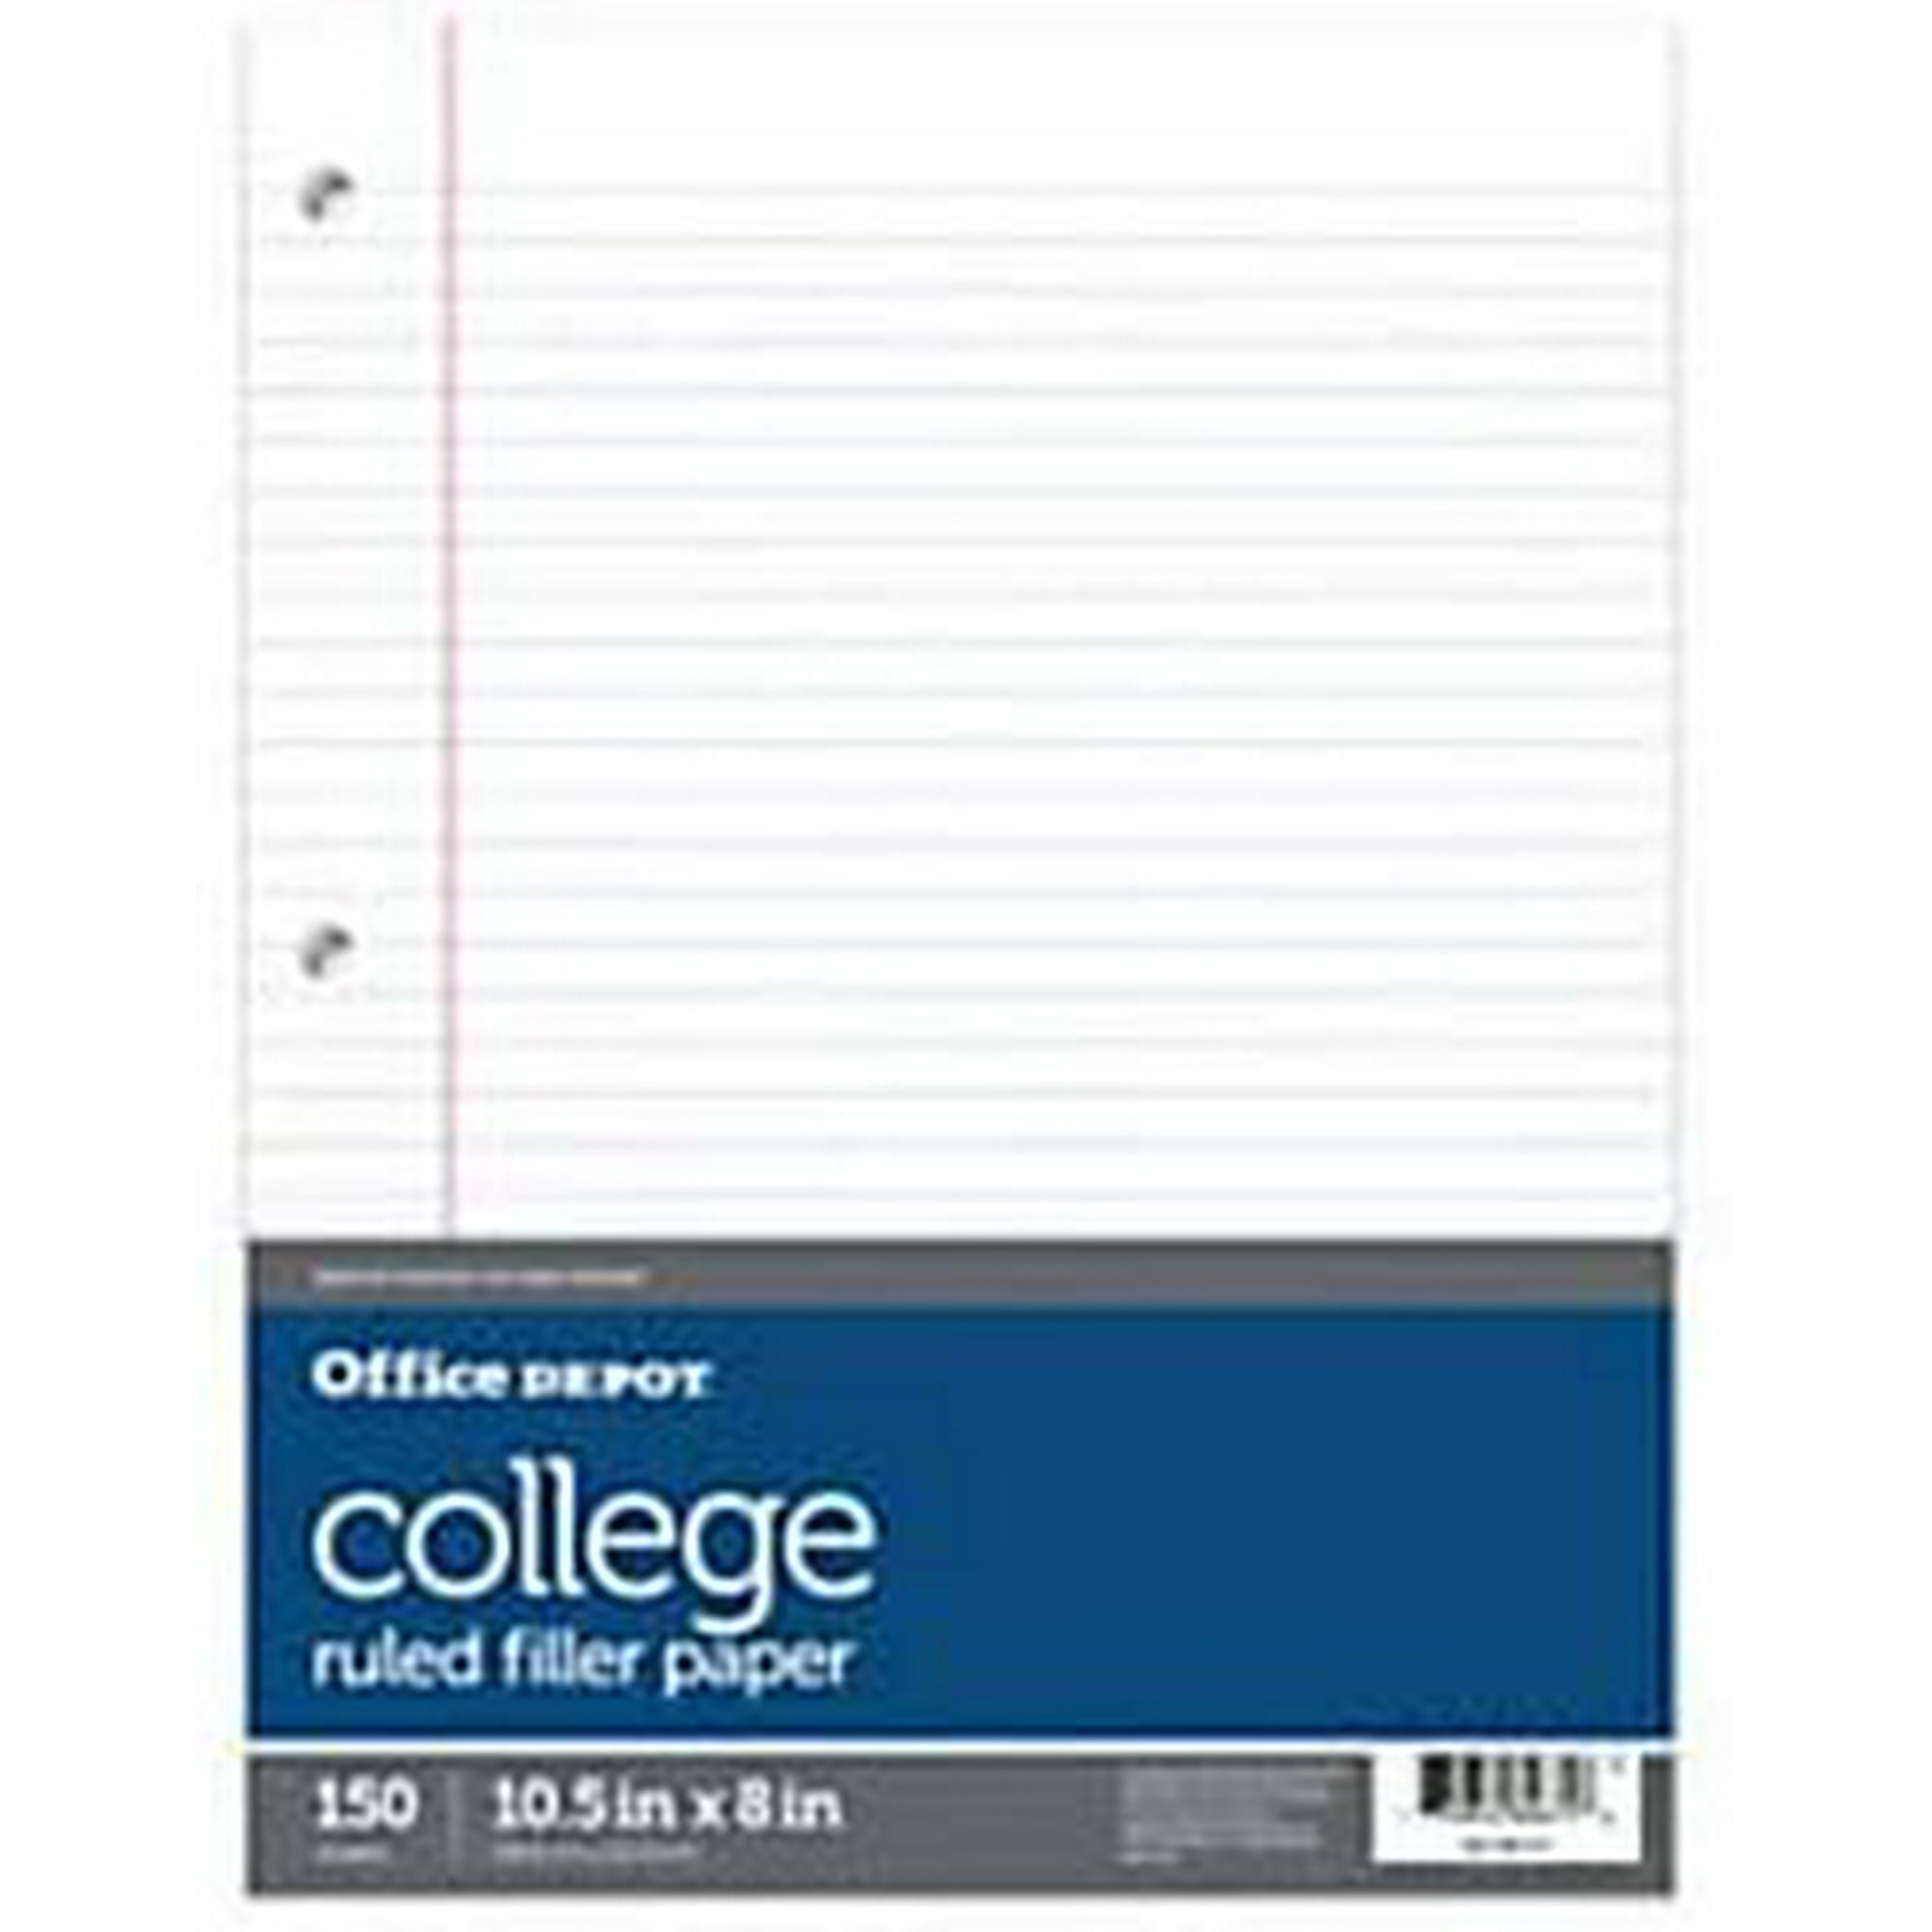 Office Depot Brand Notebook Filler Paper, College-Ru, 8in x 10 1/2in,  3-Hole Punched, White, Pack of 150 | Walmart Canada